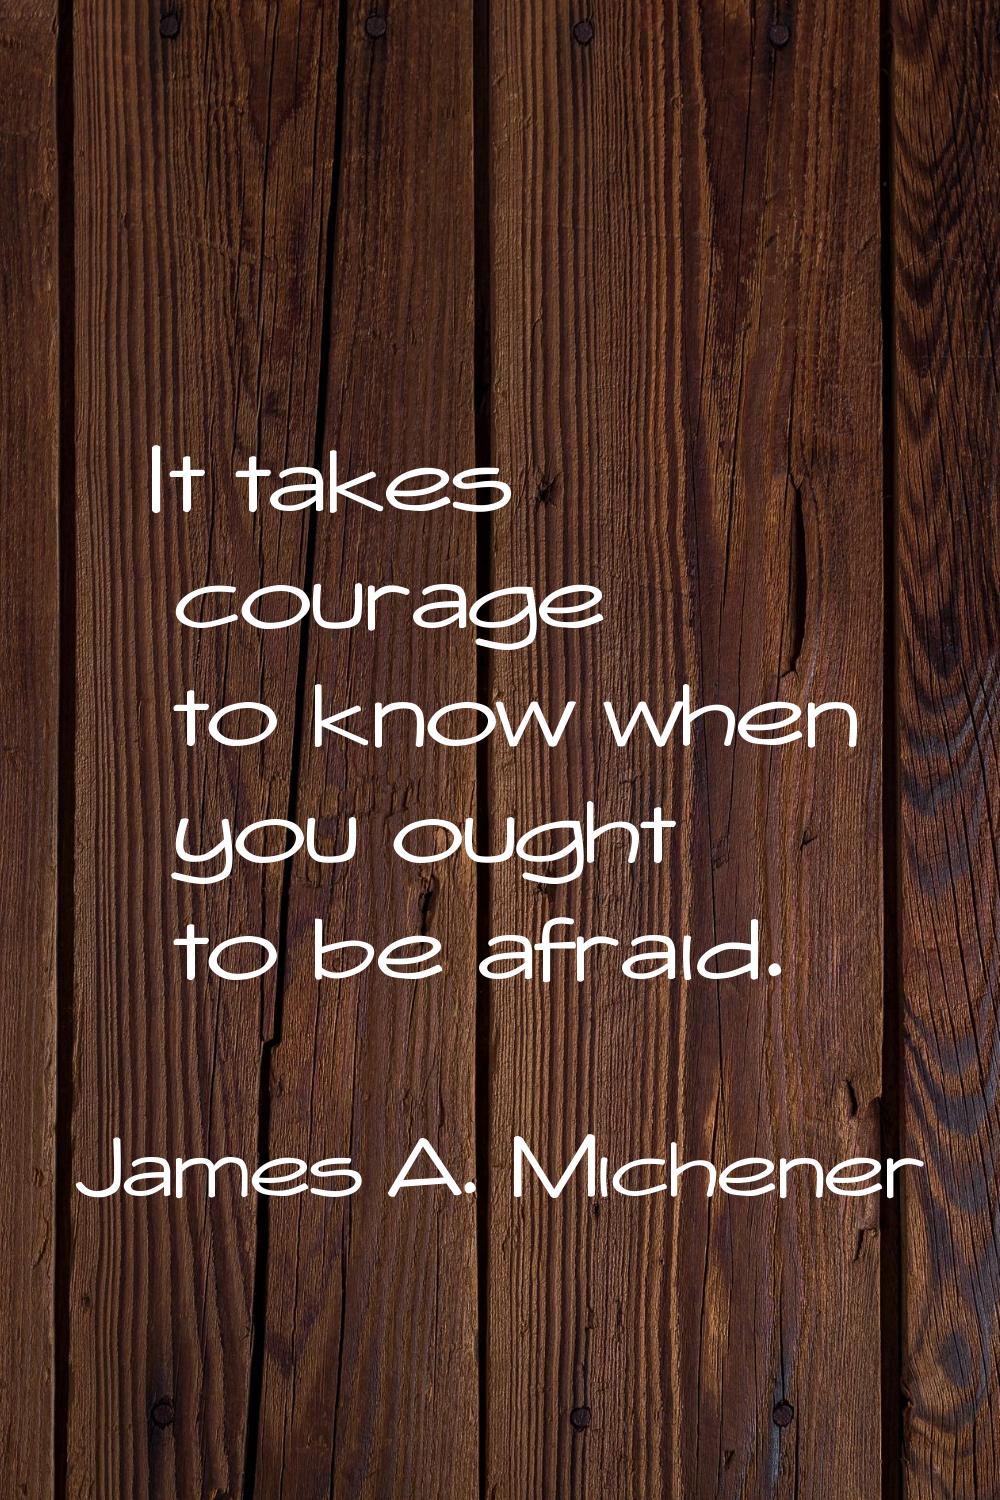 It takes courage to know when you ought to be afraid.